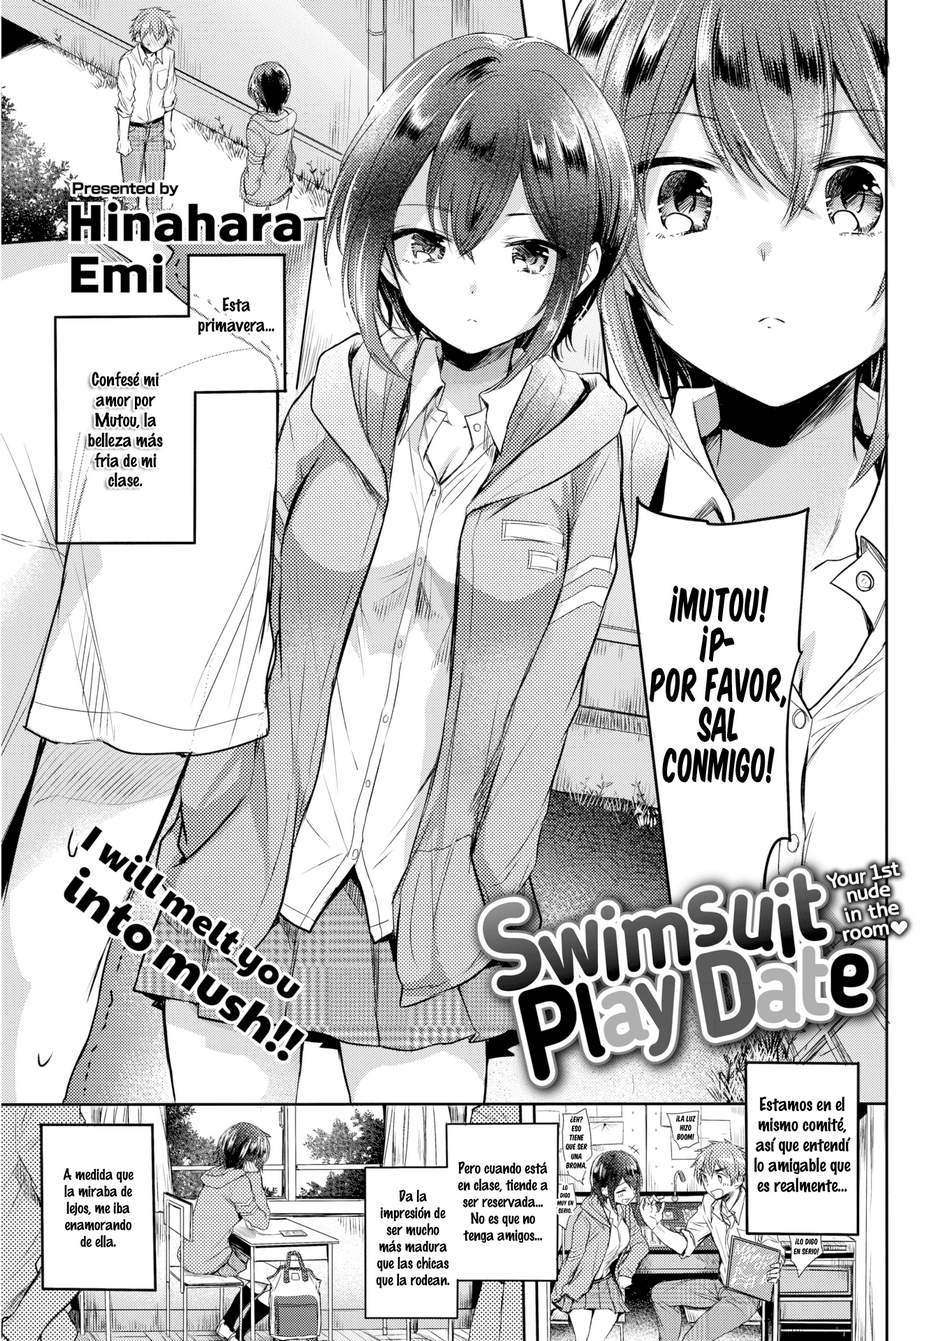 Swimsuit Play Date - Page #1